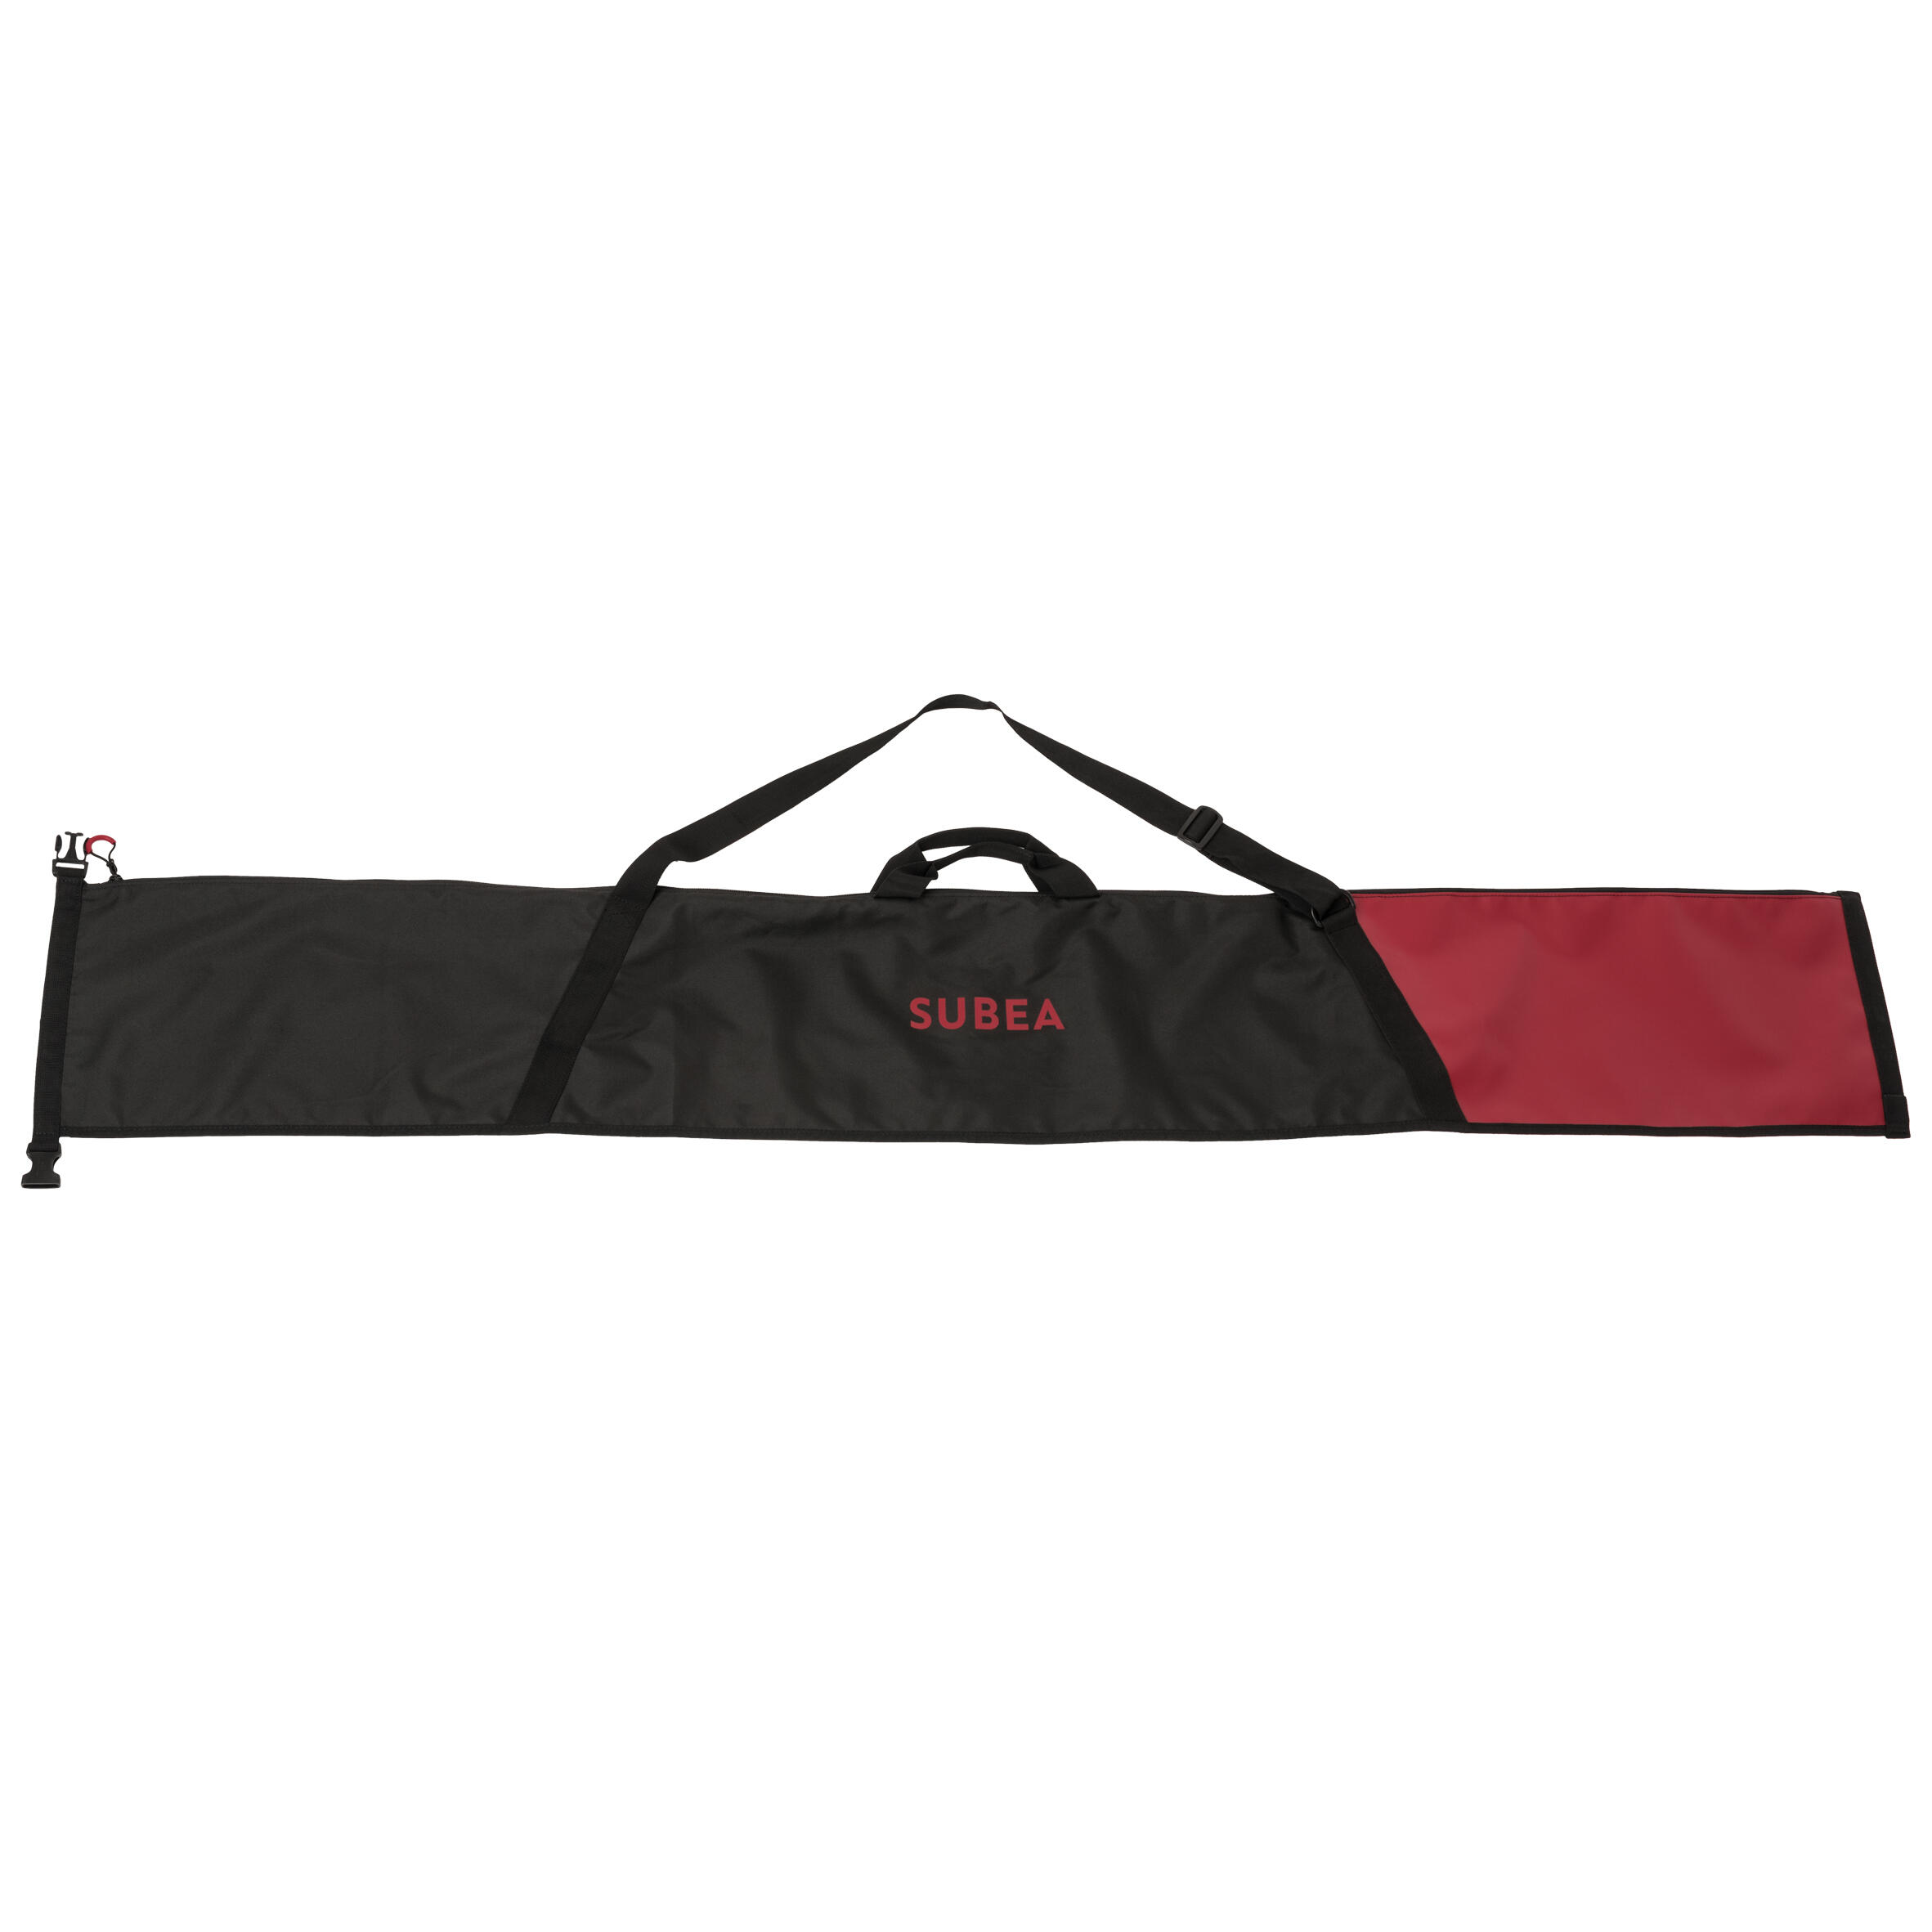 Cressi Speargun Protective Bag for Spearfishing Lovers designed in Italy Speargun Carrying Bag 